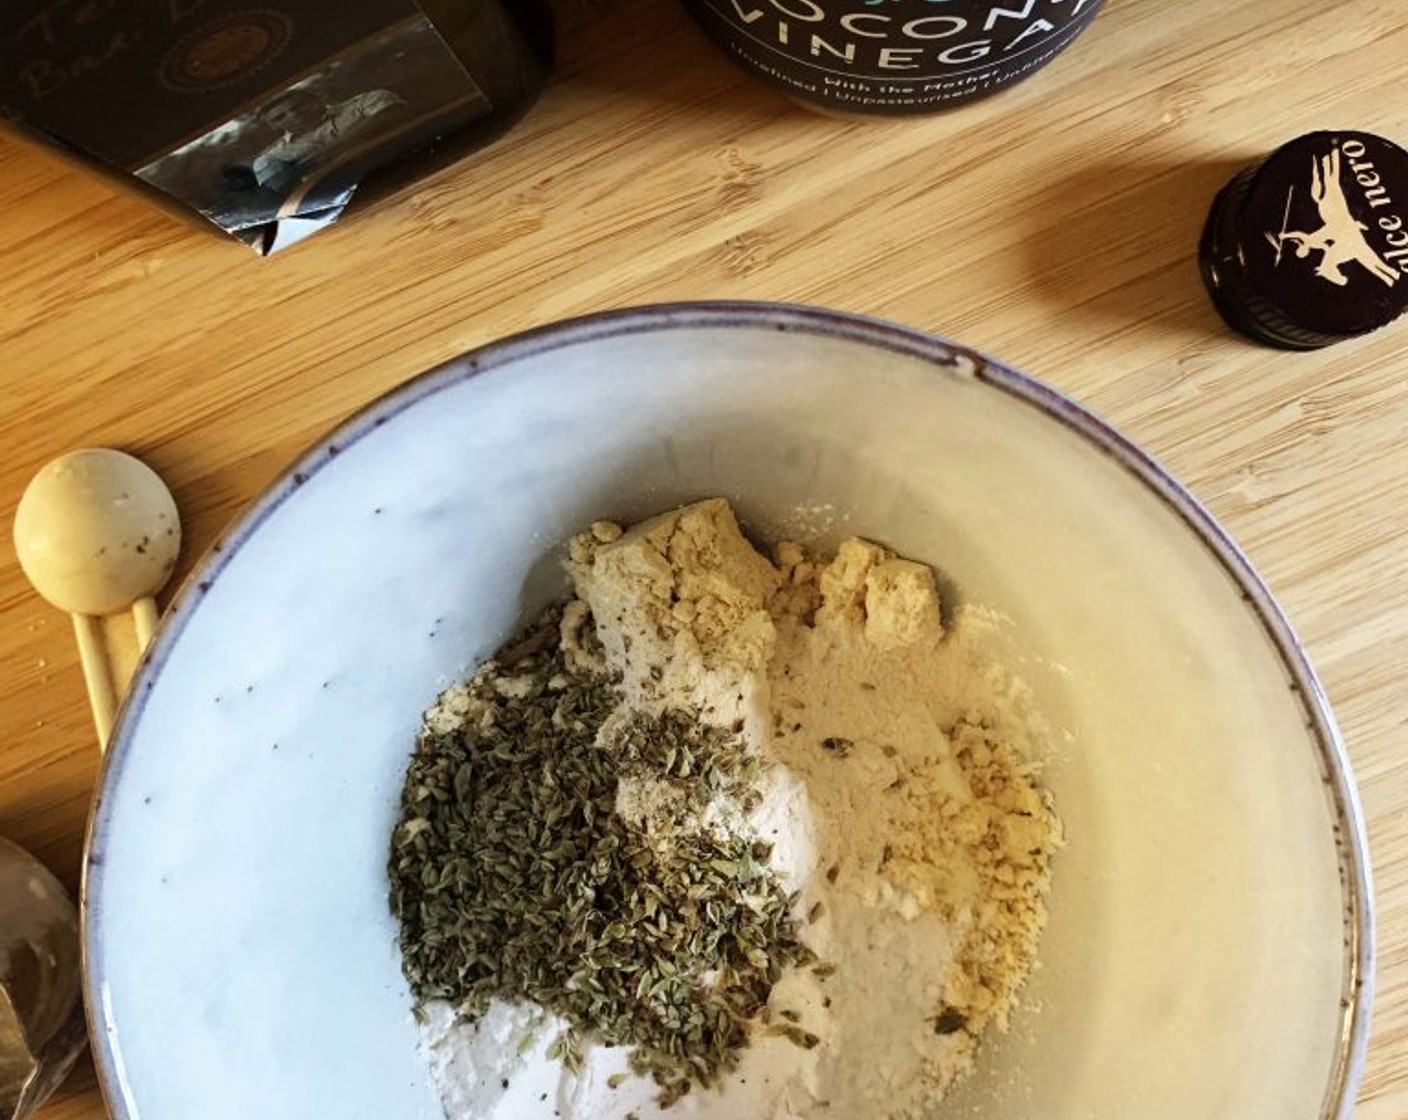 step 2 In a bowl combine the Unflavored Whey Protein Powder (3 1/2 Tbsp), Soy Flour (4 Tbsp), Rice Flour (1 1/2 Tbsp), Dried Oregano (1 tsp), and Xanthan Gum (1/2 tsp).